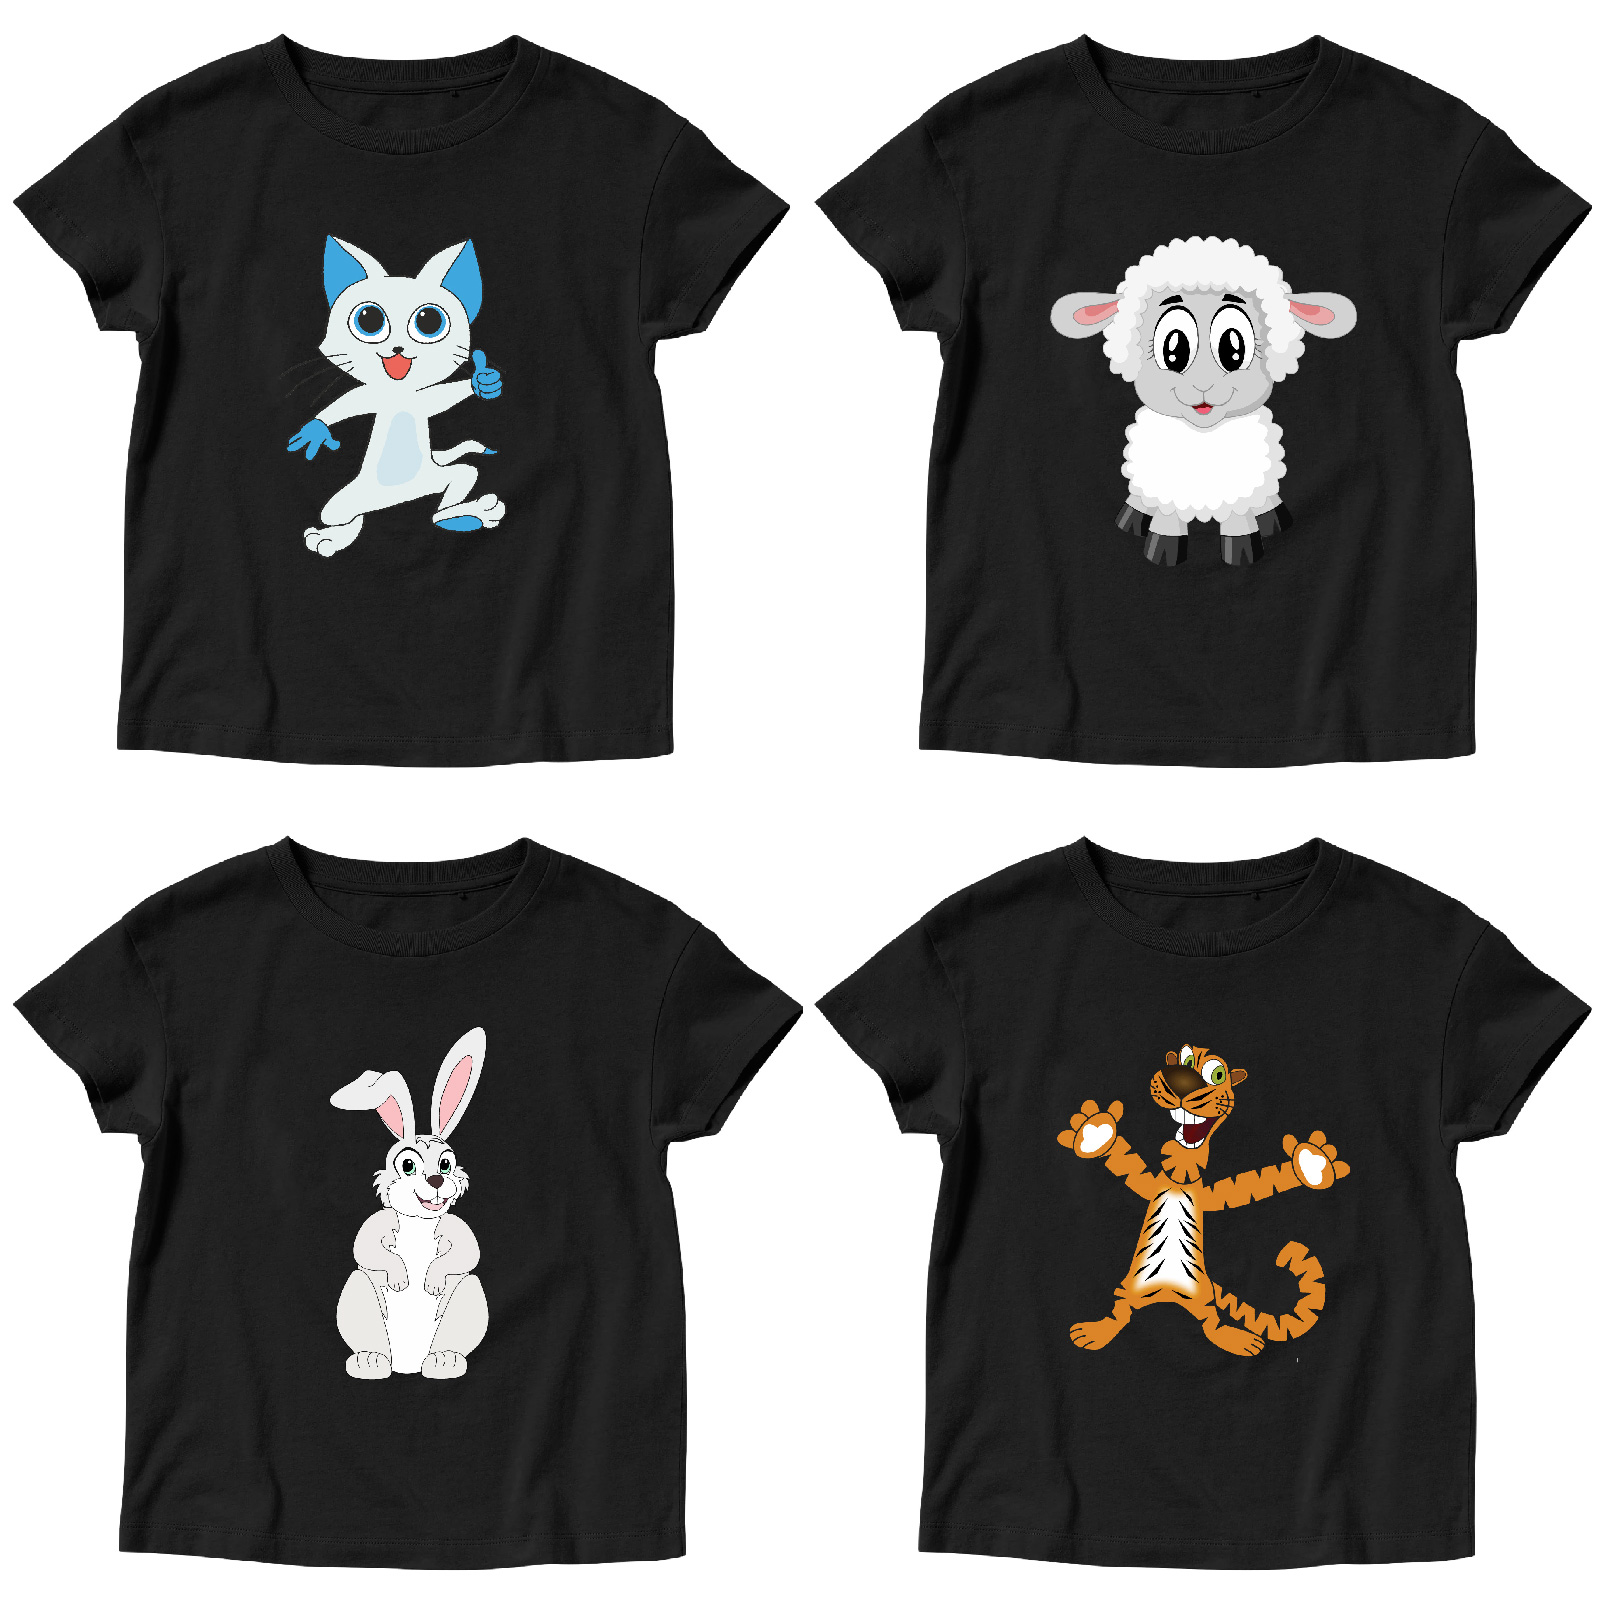 CARTOON T SHIRTS FOR KIDS cover image.